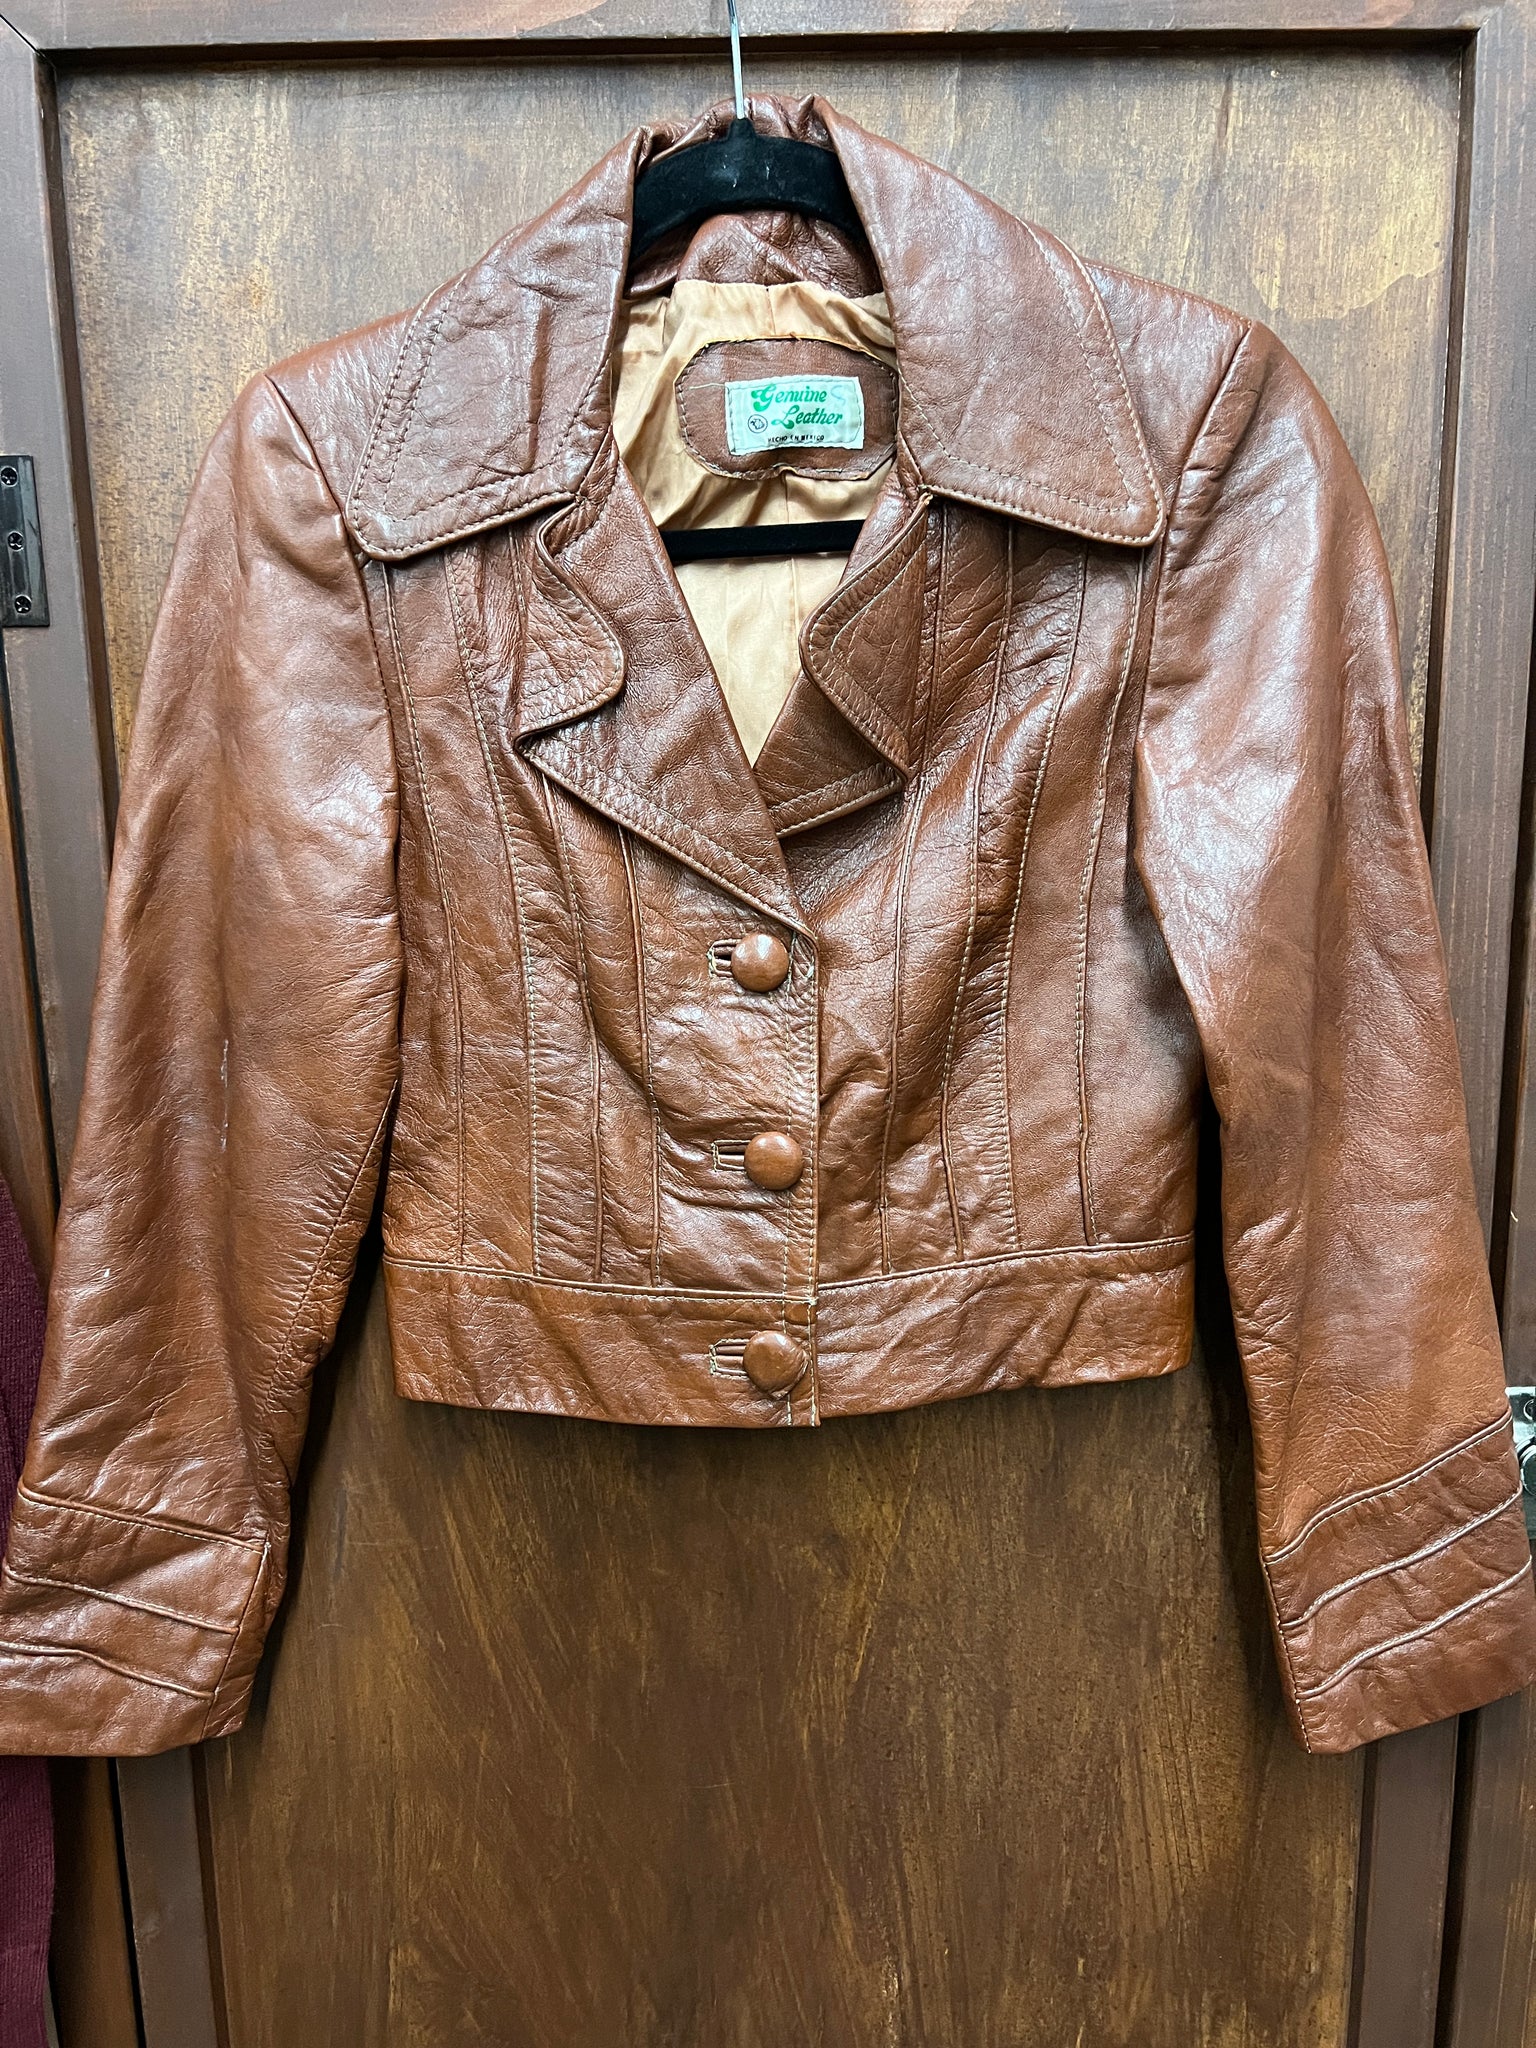 1970s-JACKET-LEATHER-brown cropped w/ large collar